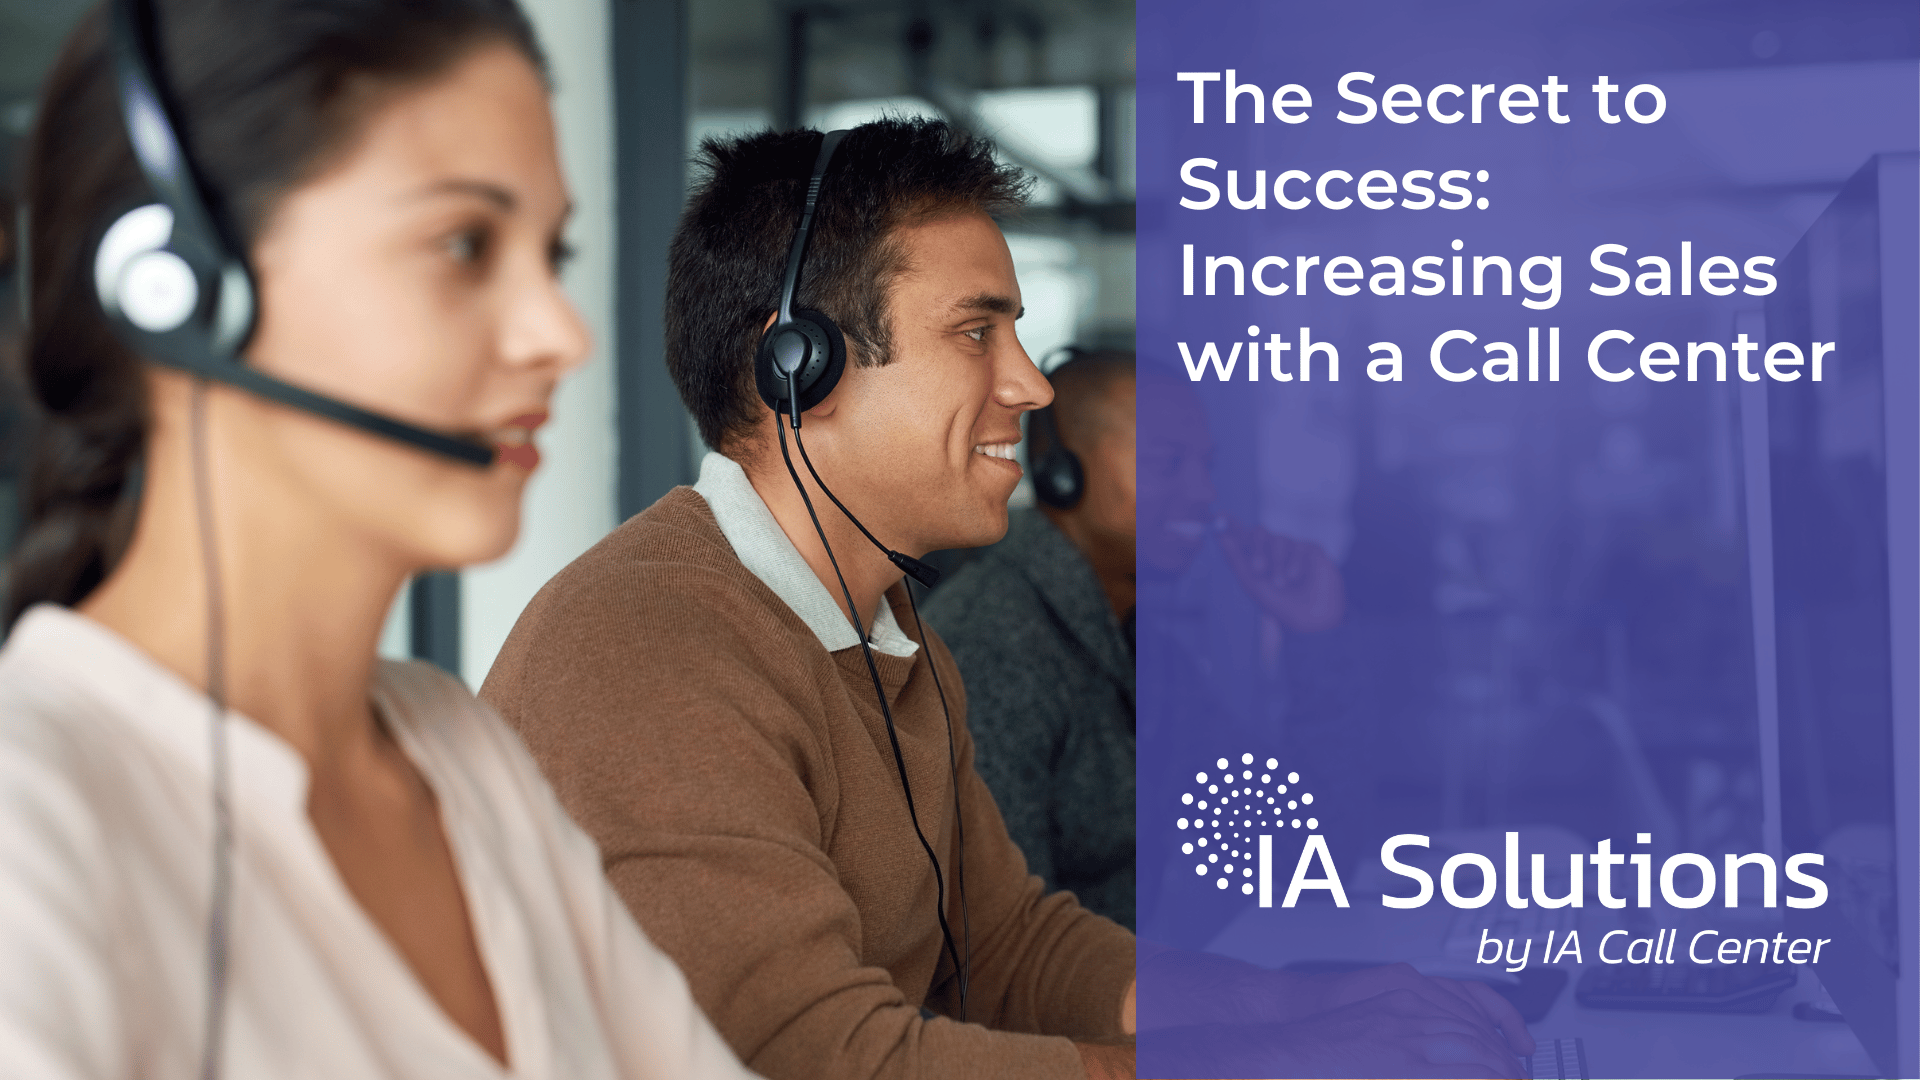 The Secret to Success Increasing Sales with a Call Center Featured Image